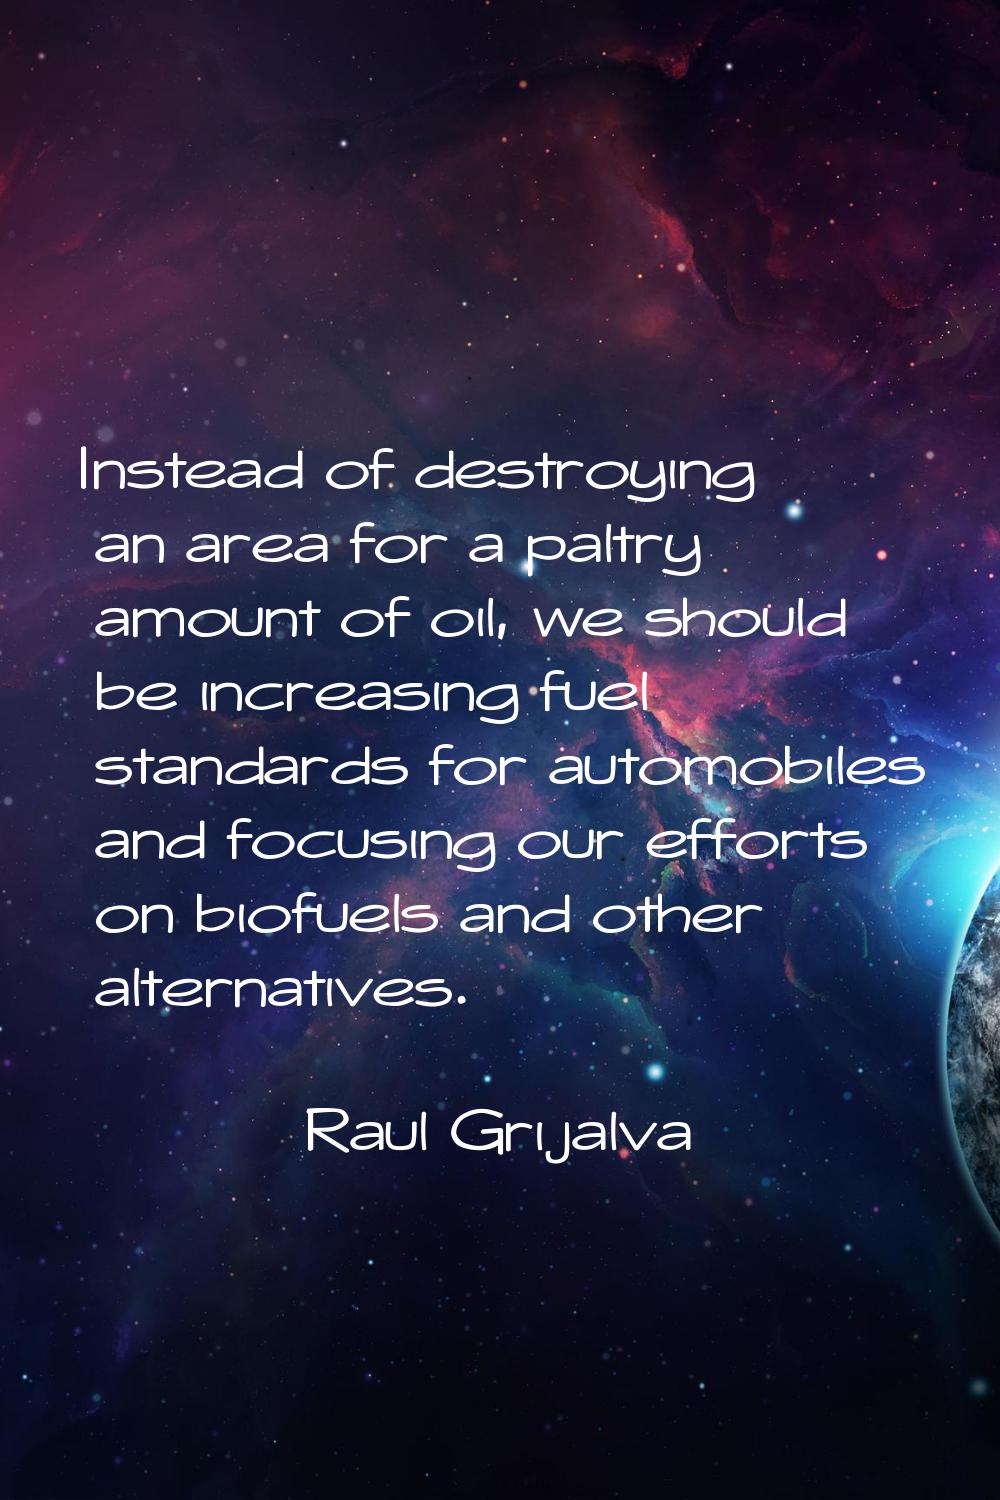 Instead of destroying an area for a paltry amount of oil, we should be increasing fuel standards fo